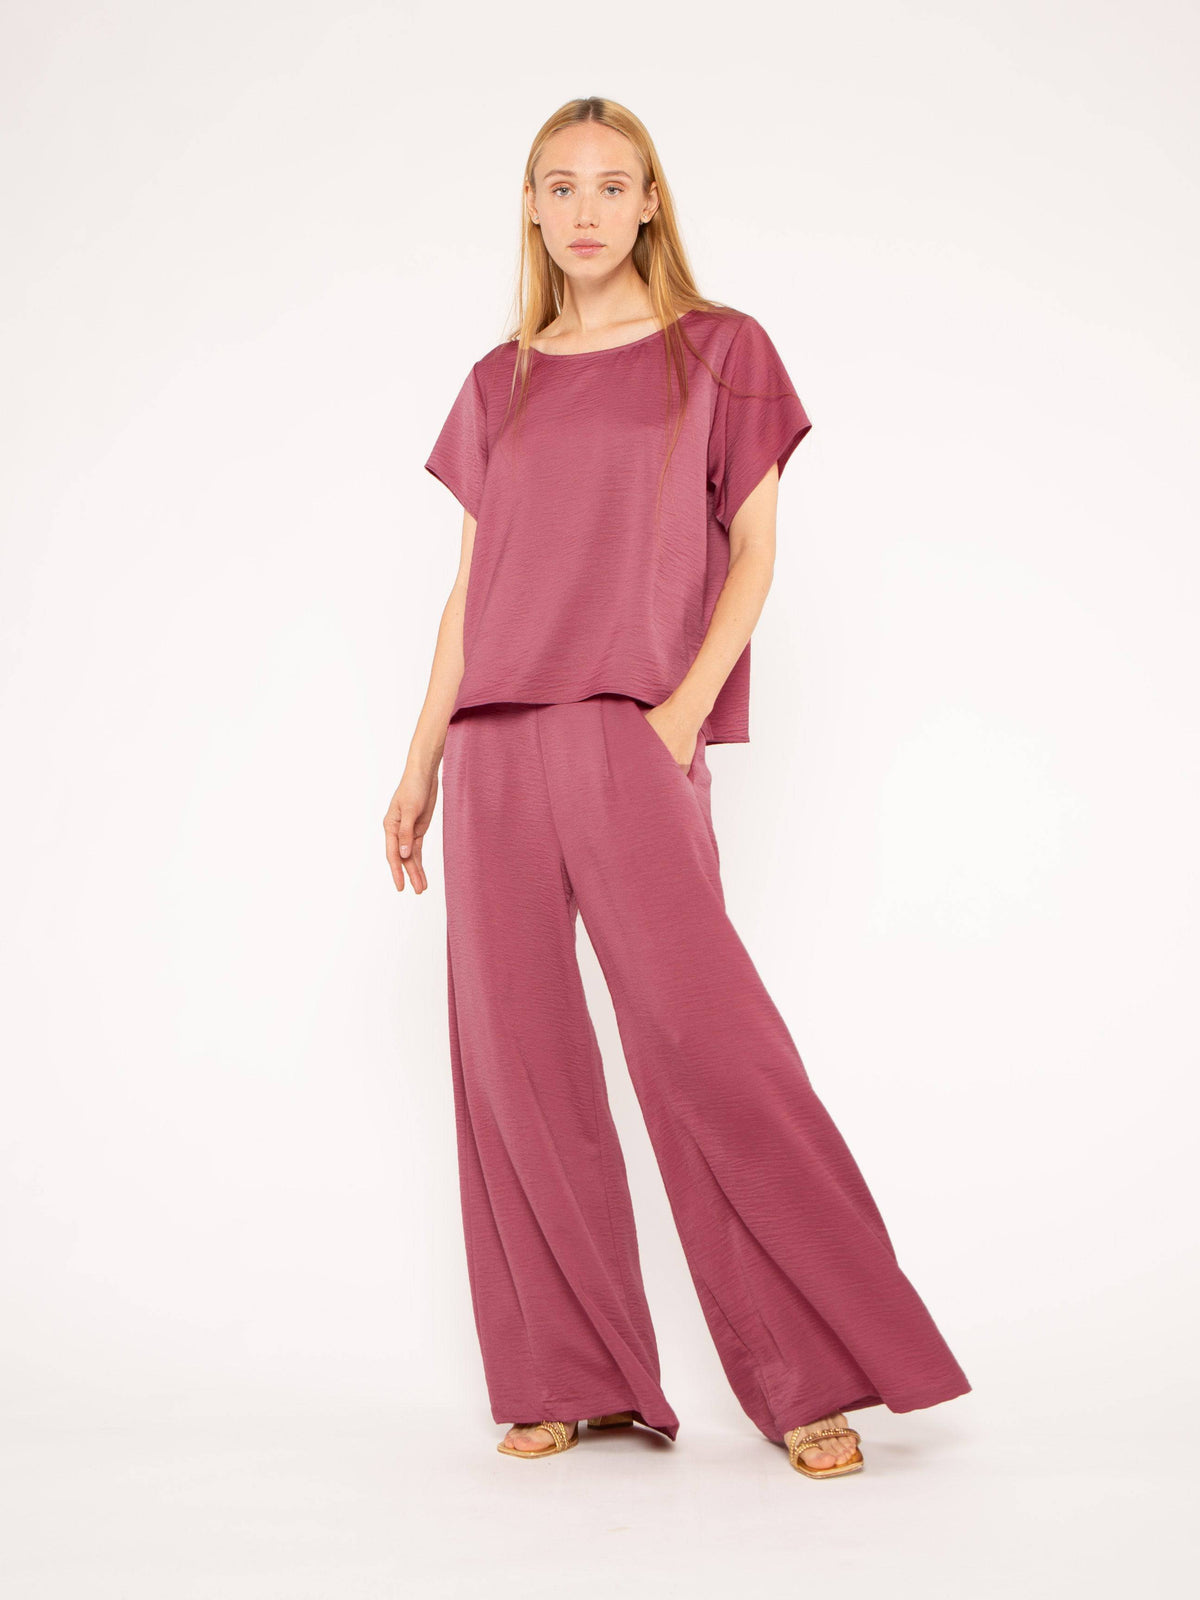 Mulberry Satin Crepe Everyday T-Shirt